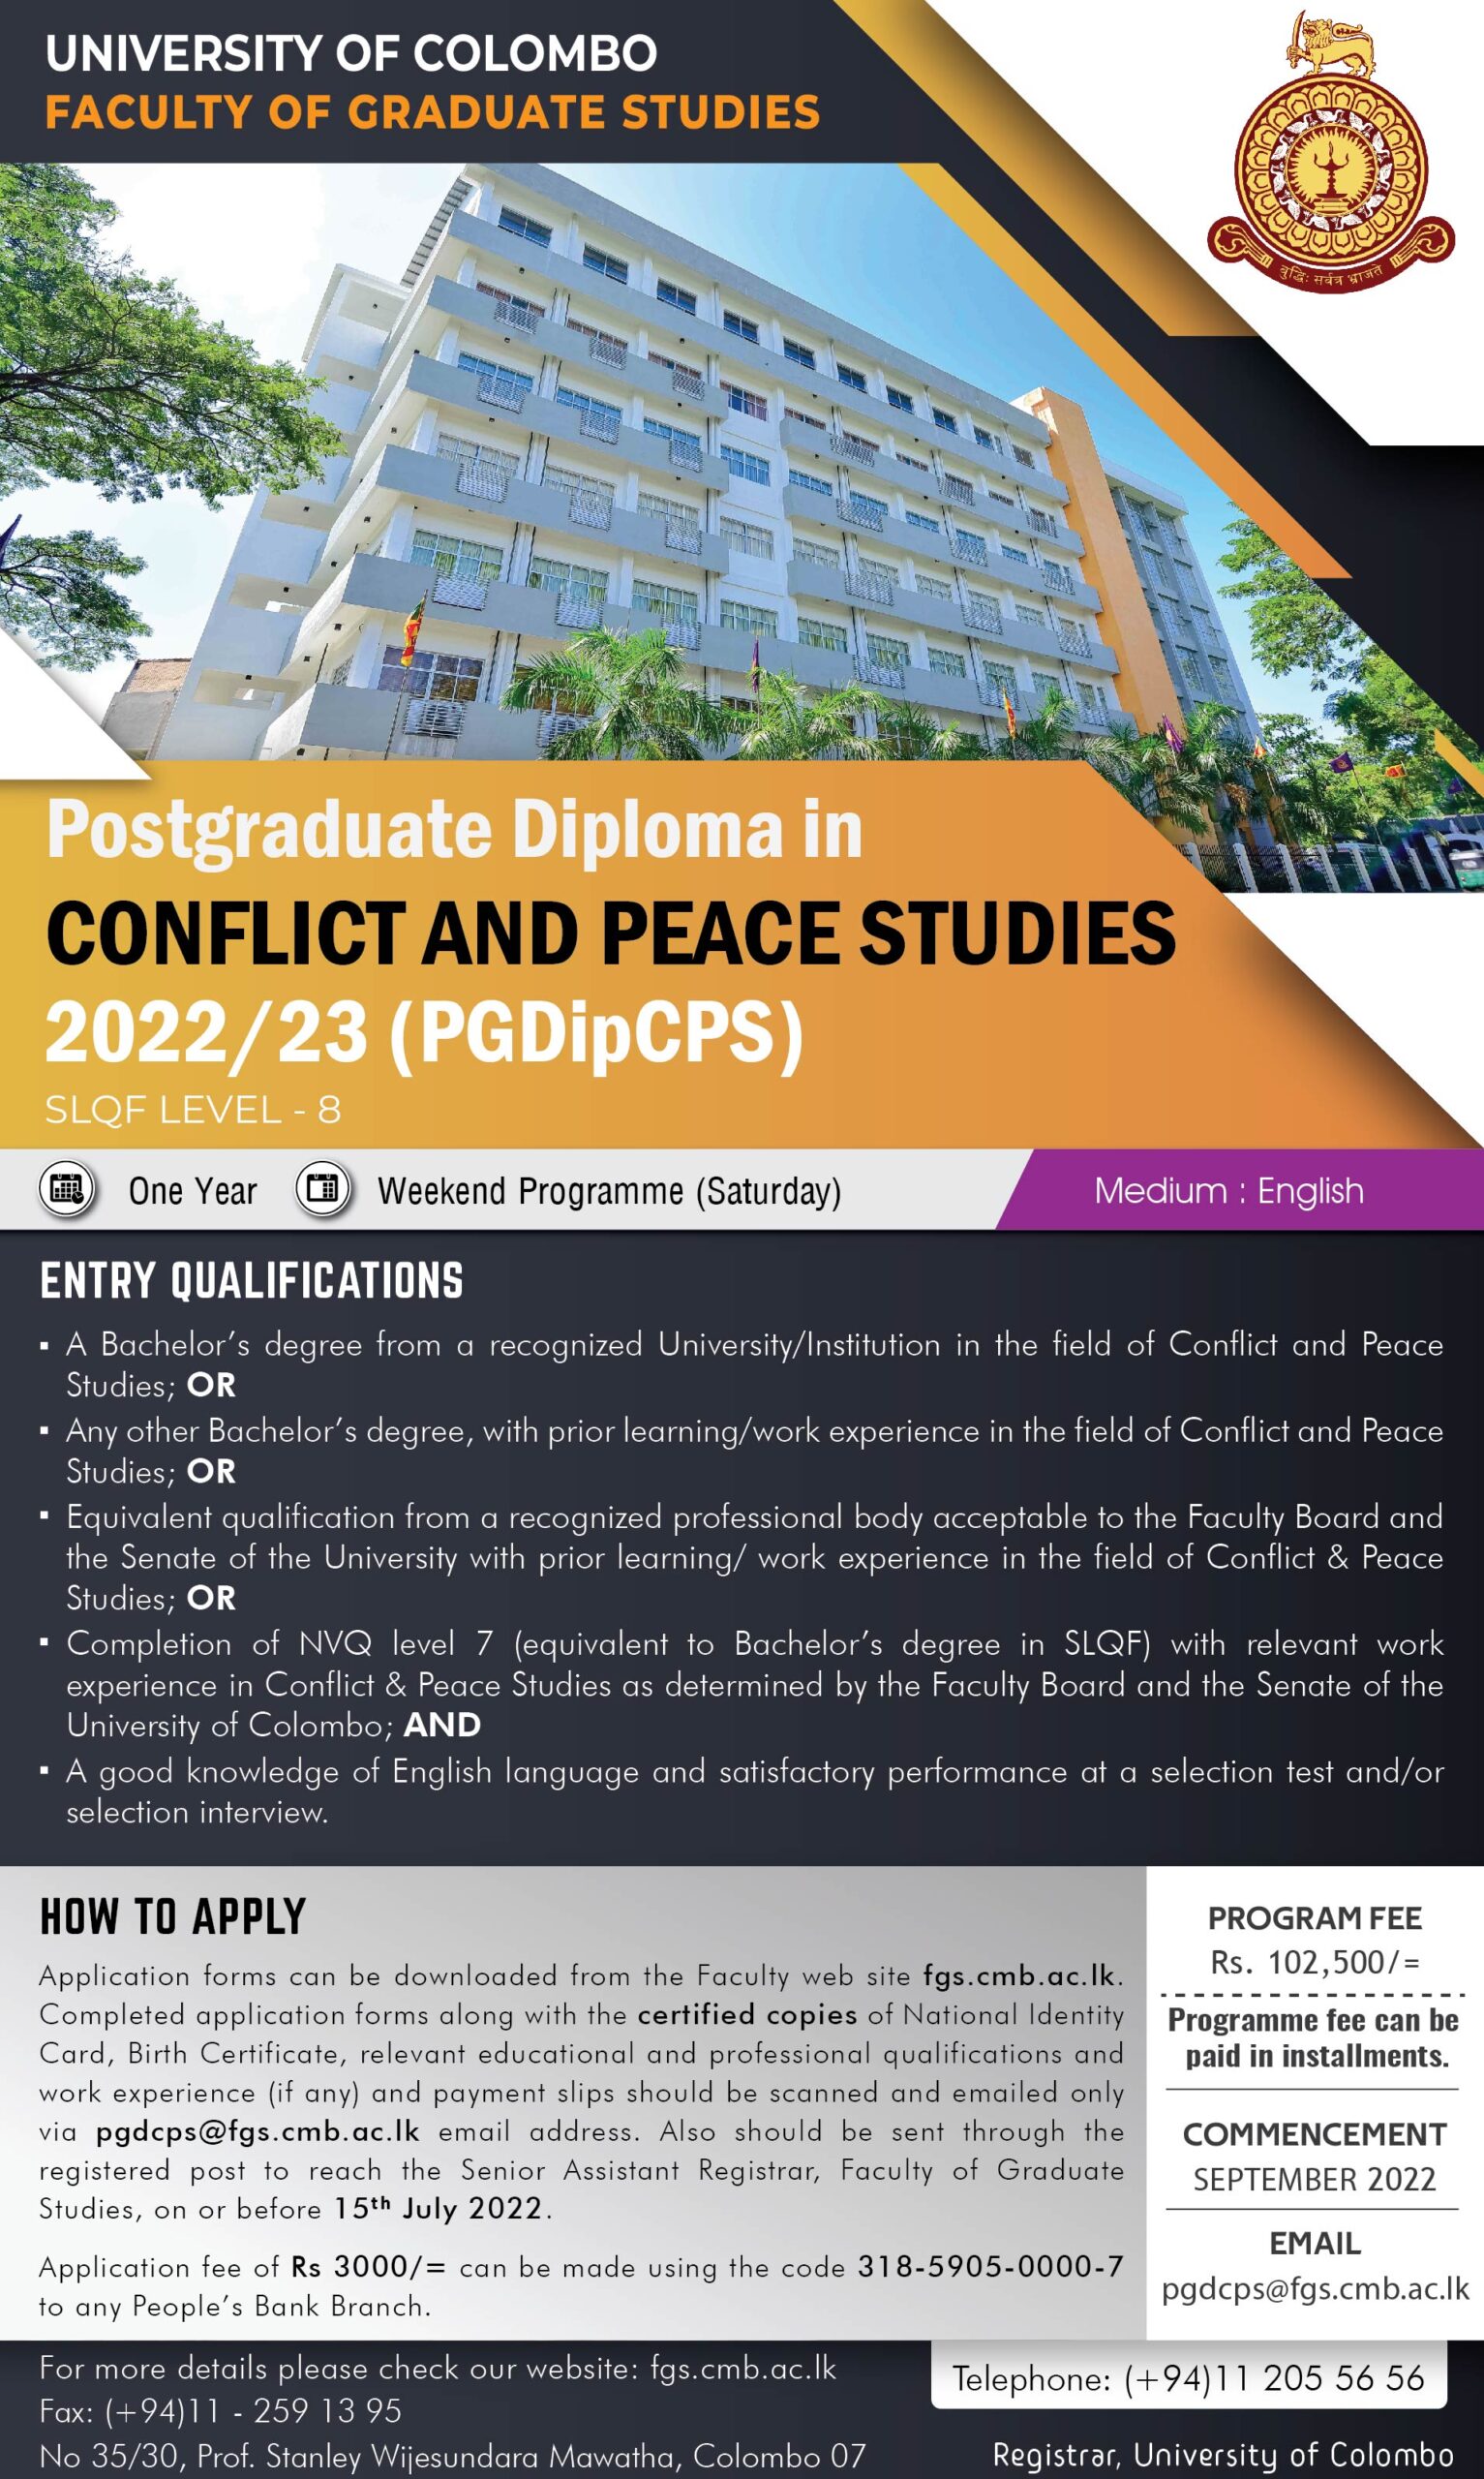 Postgraduate Diploma in Conflict and Peace Studies - (PGDipCPS) 2022/23 - University of Colombo